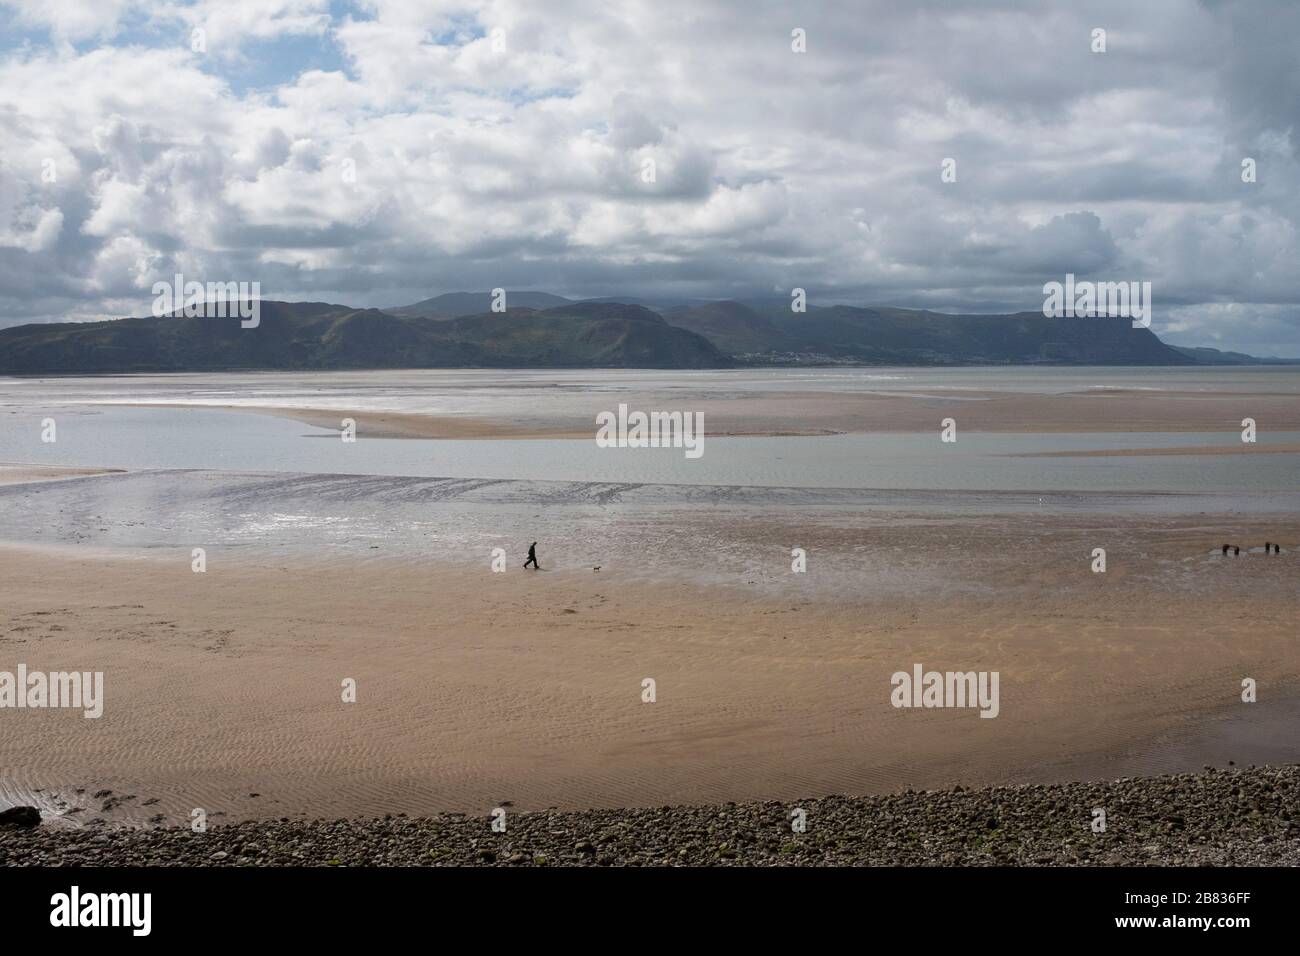 A man walking on North Shore beach, Llandudno, with Snowdonia in the background. Stock Photo